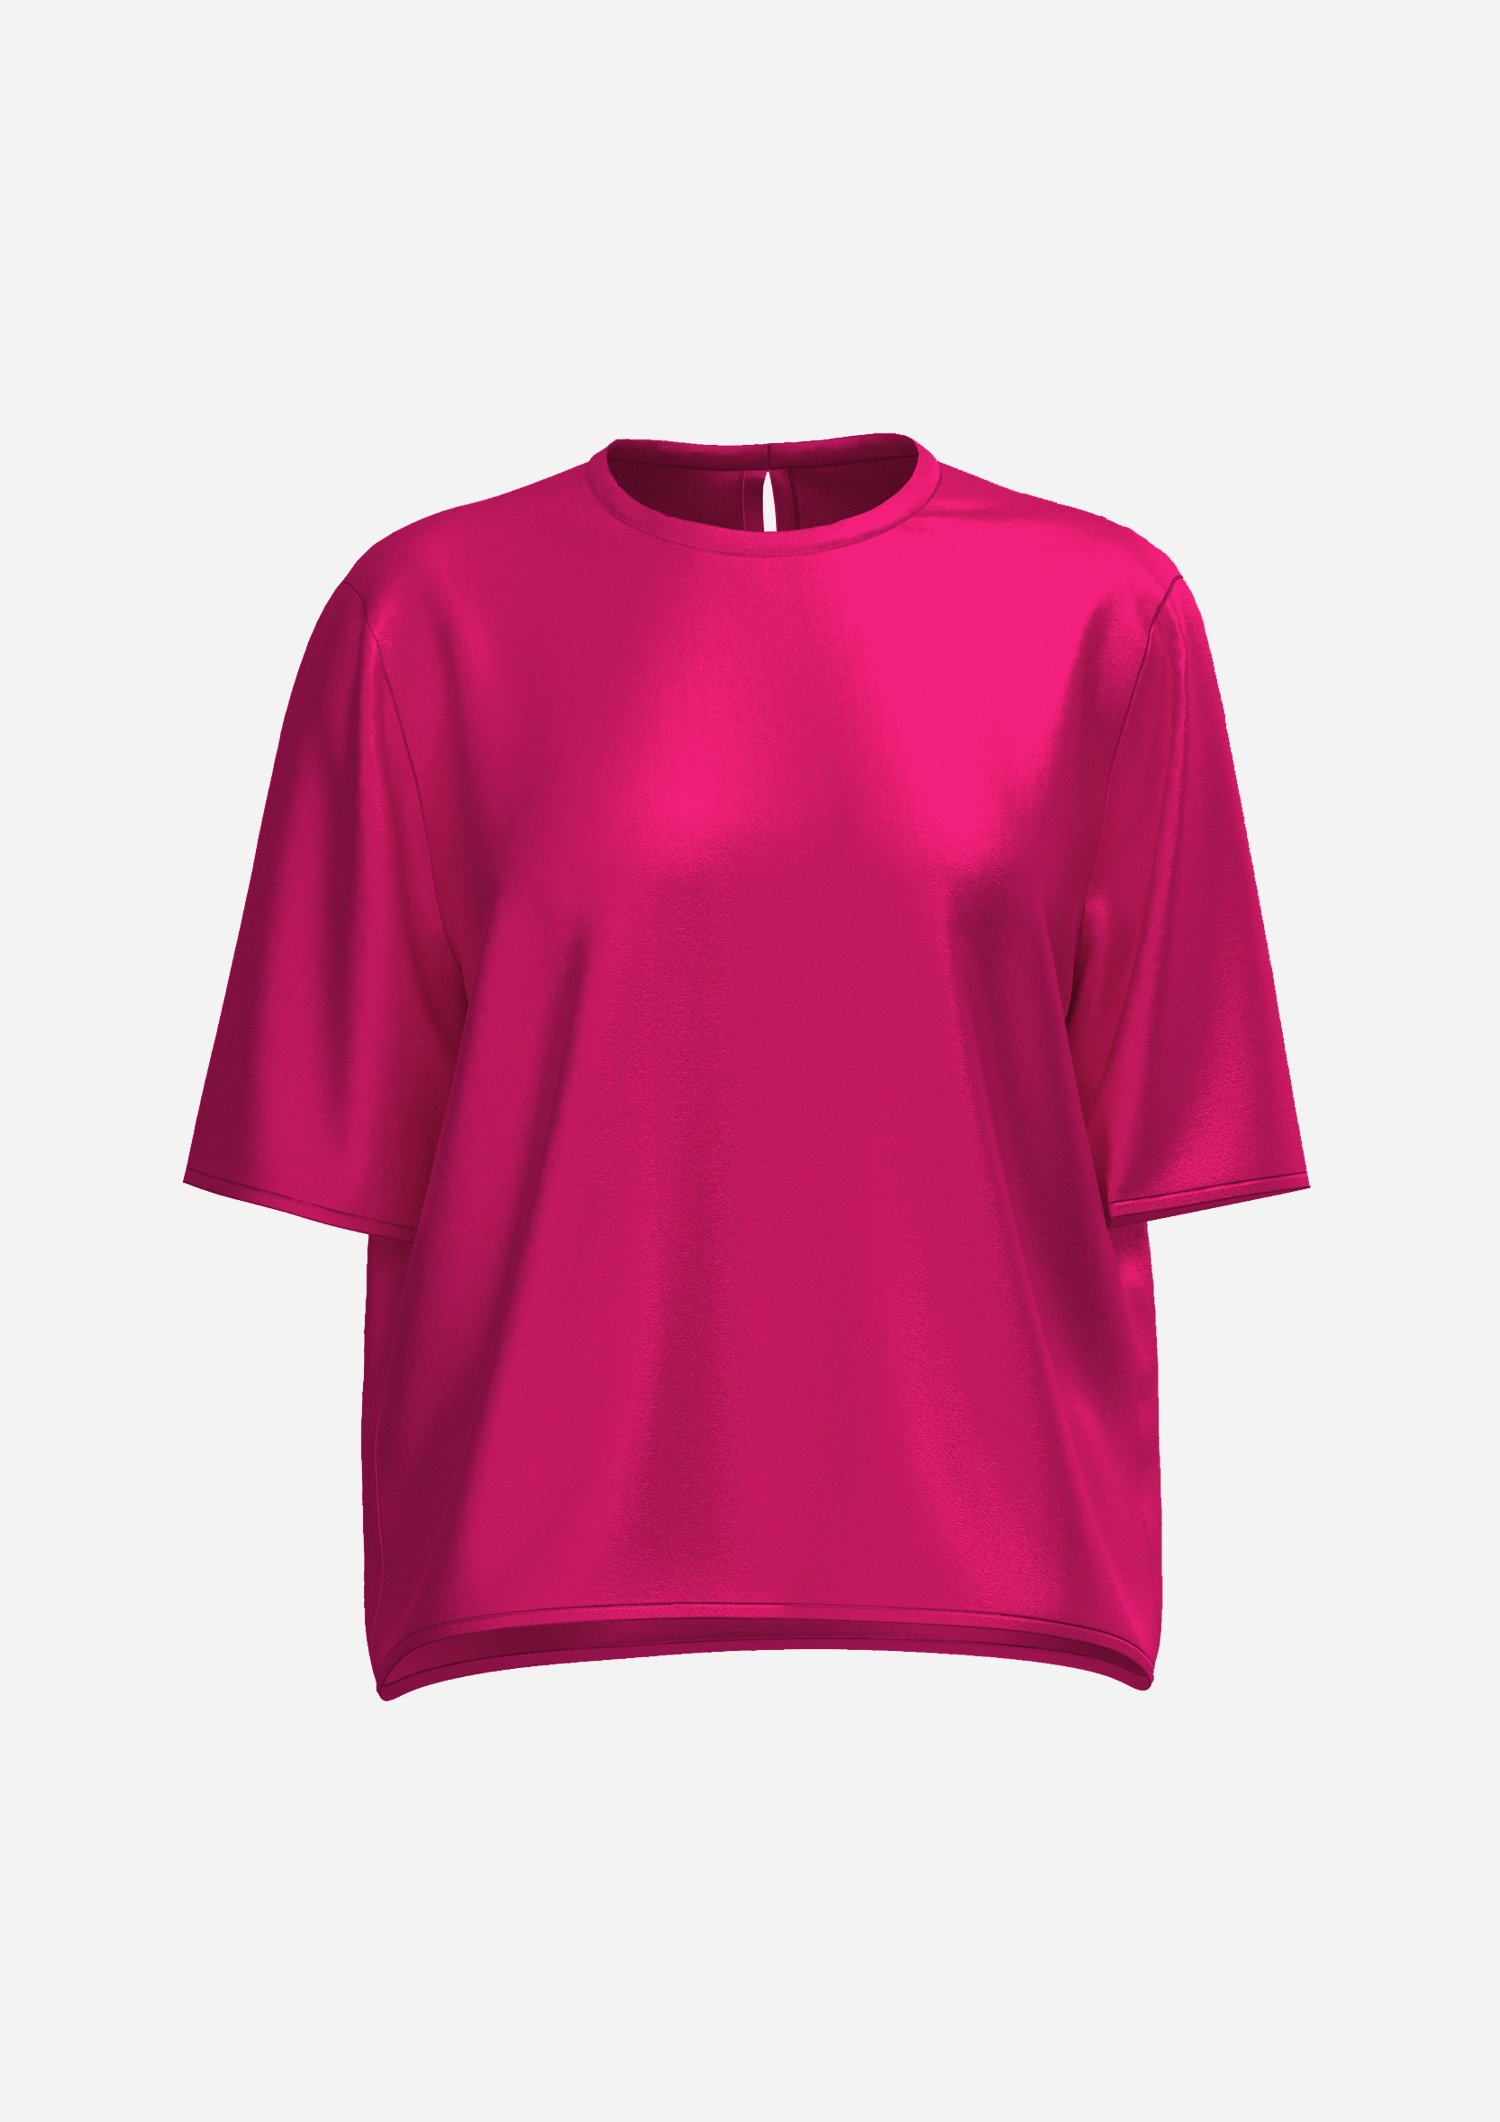 T-Shirt in pink